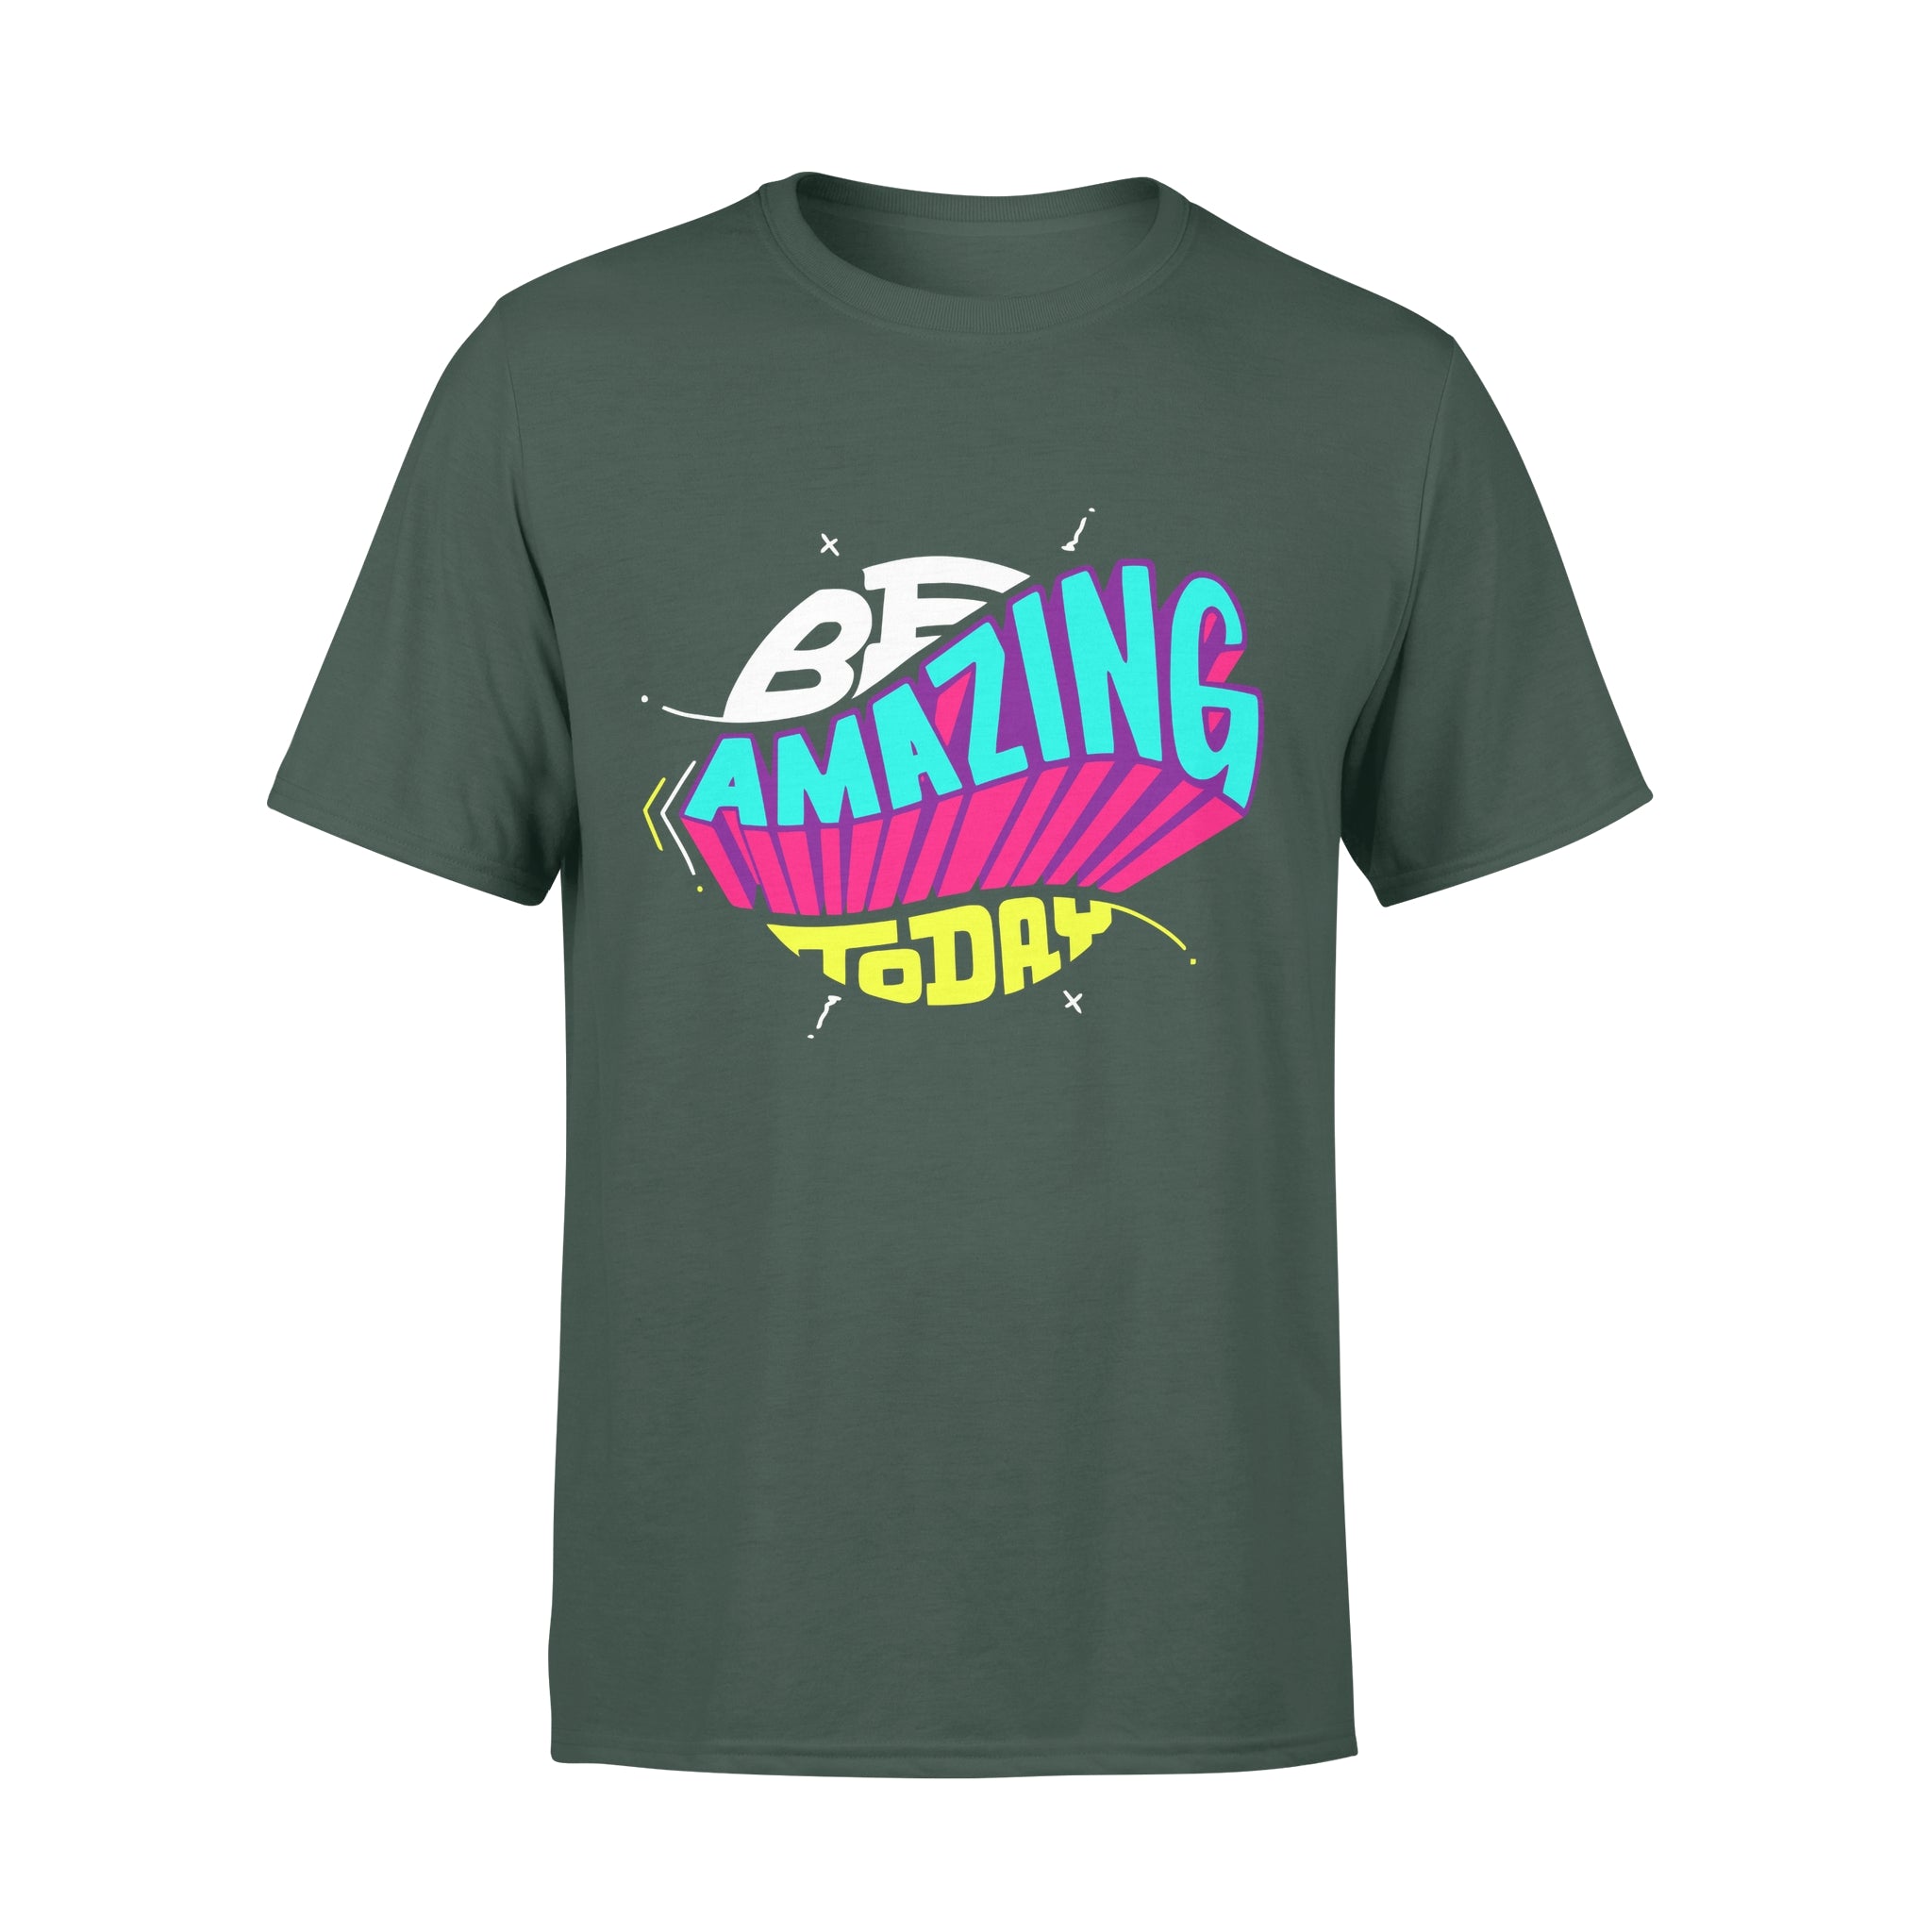 Be Amazing Today -  T-shirt